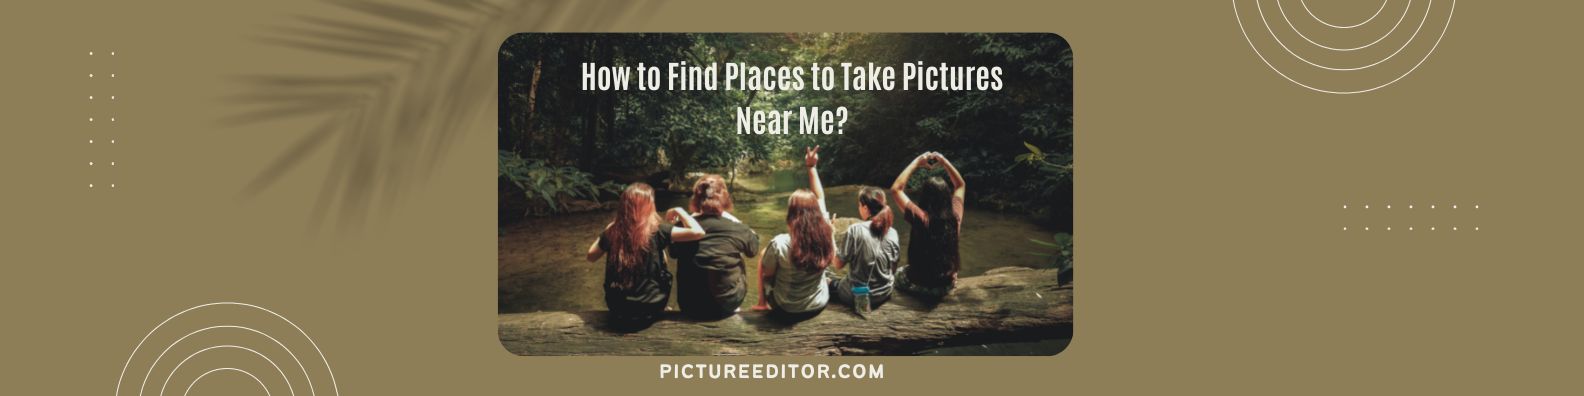 How to Find Places to Take Pictures Near Me